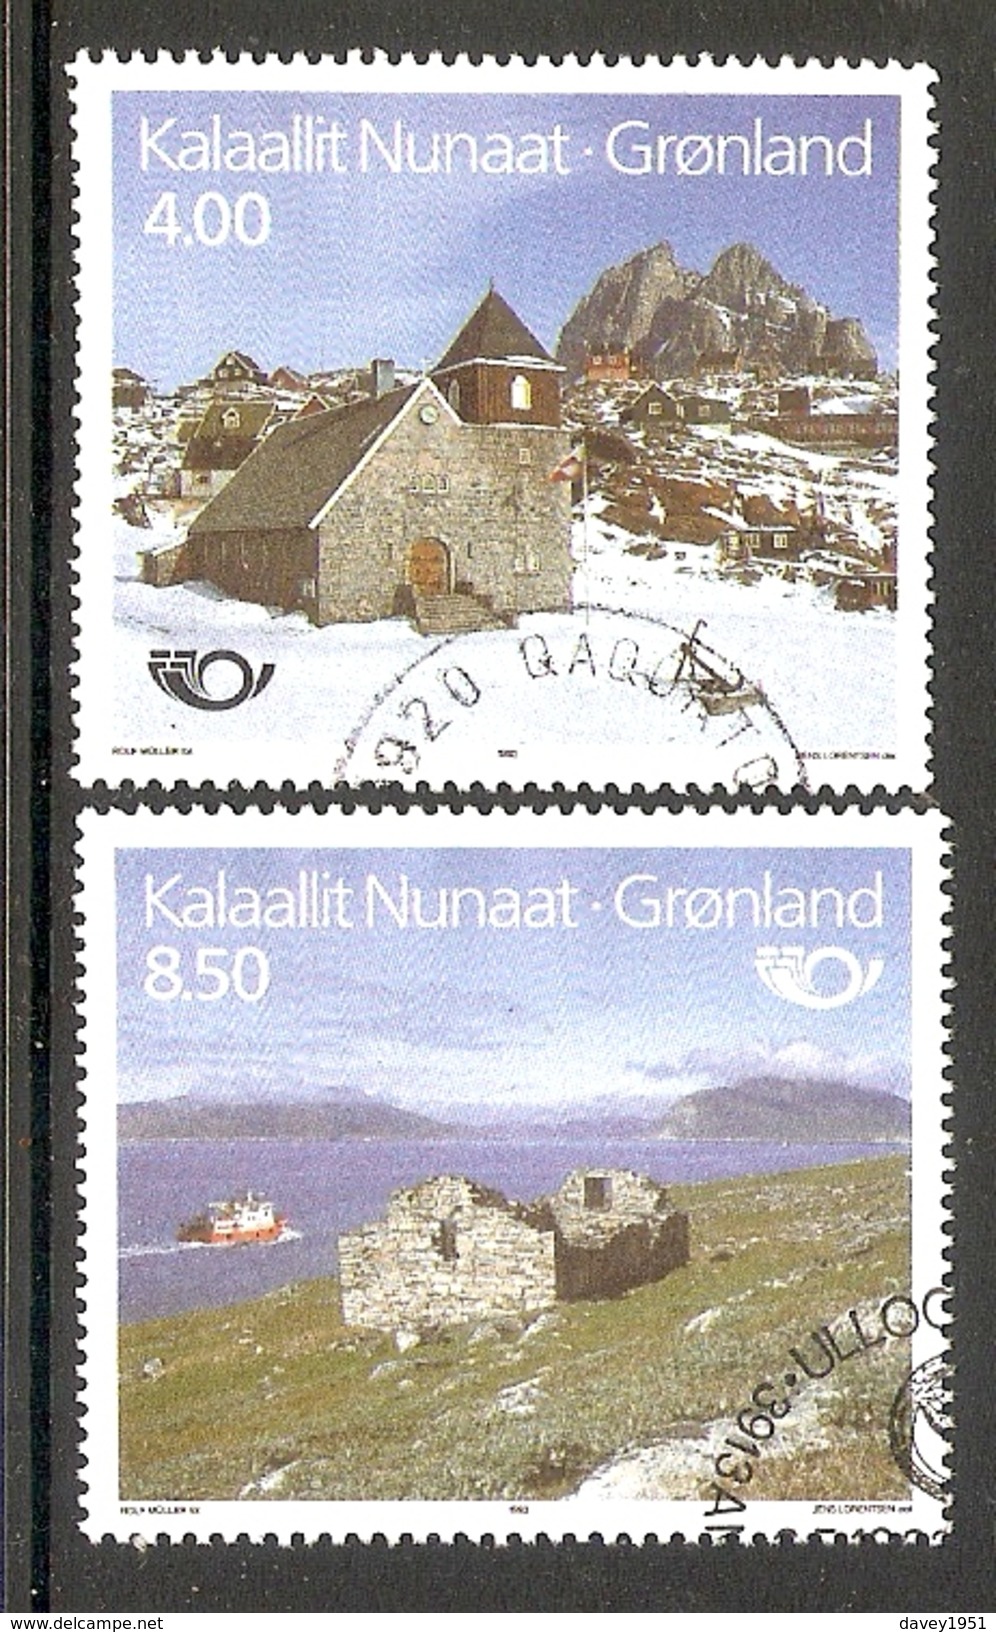 004164 Greenland 1993 Churches Set FU - Used Stamps